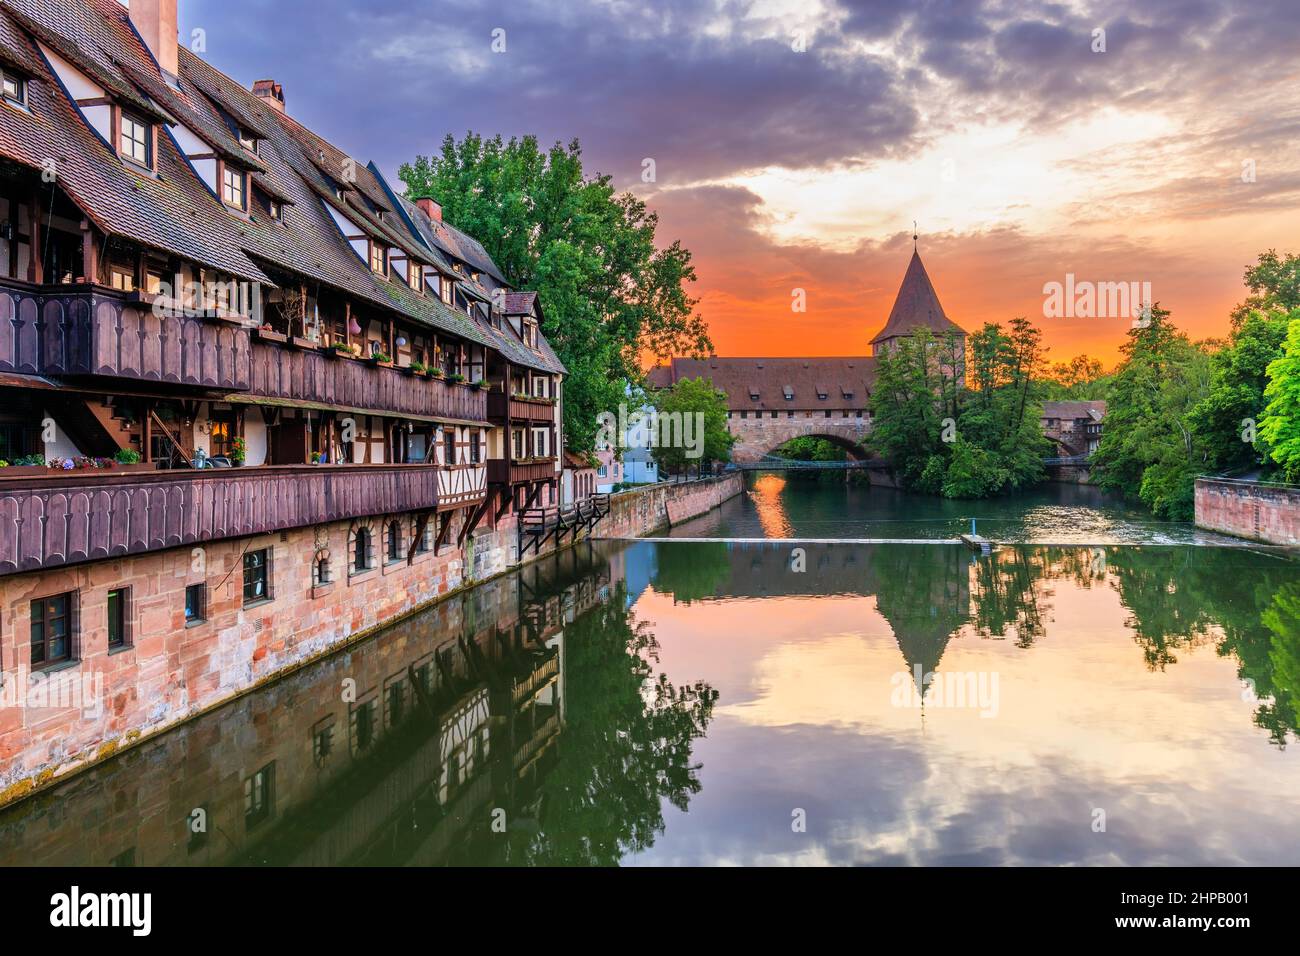 Nuremberg, state of Bavaria, Germany. The historic old town at sunset. Stock Photo